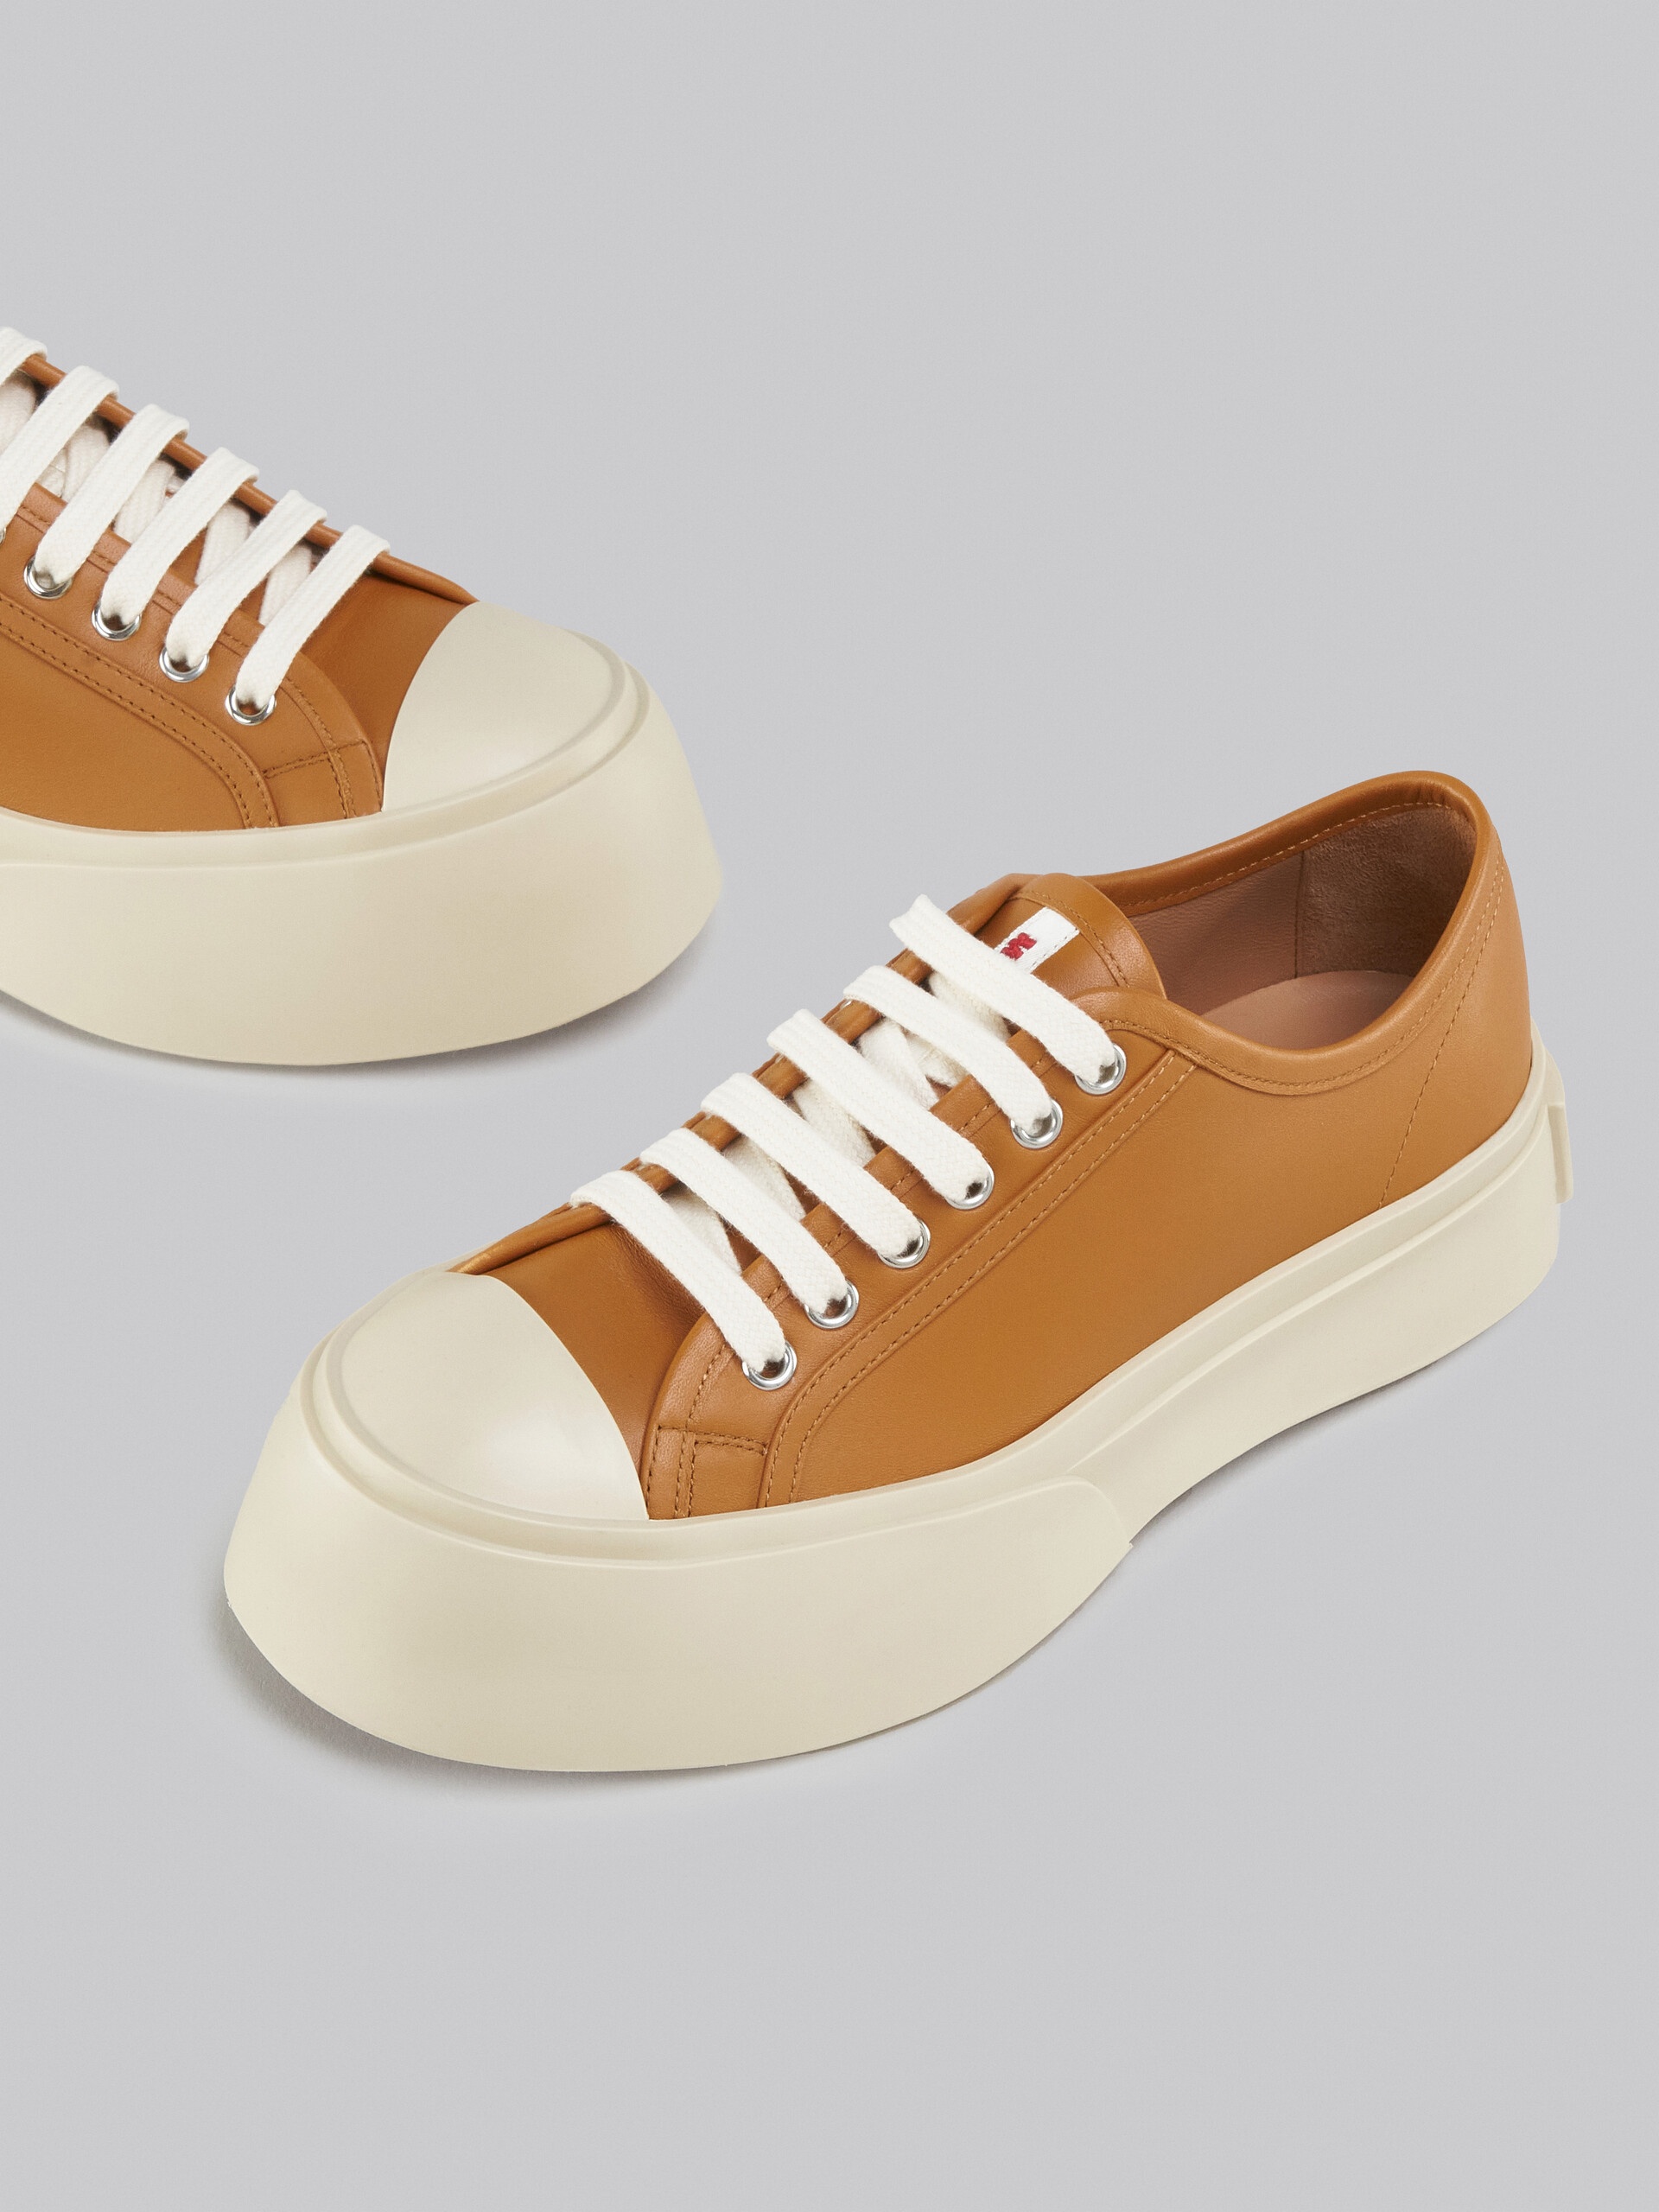 BROWN NAPPA LEATHER PABLO LACE-UP SNEAKER - 5